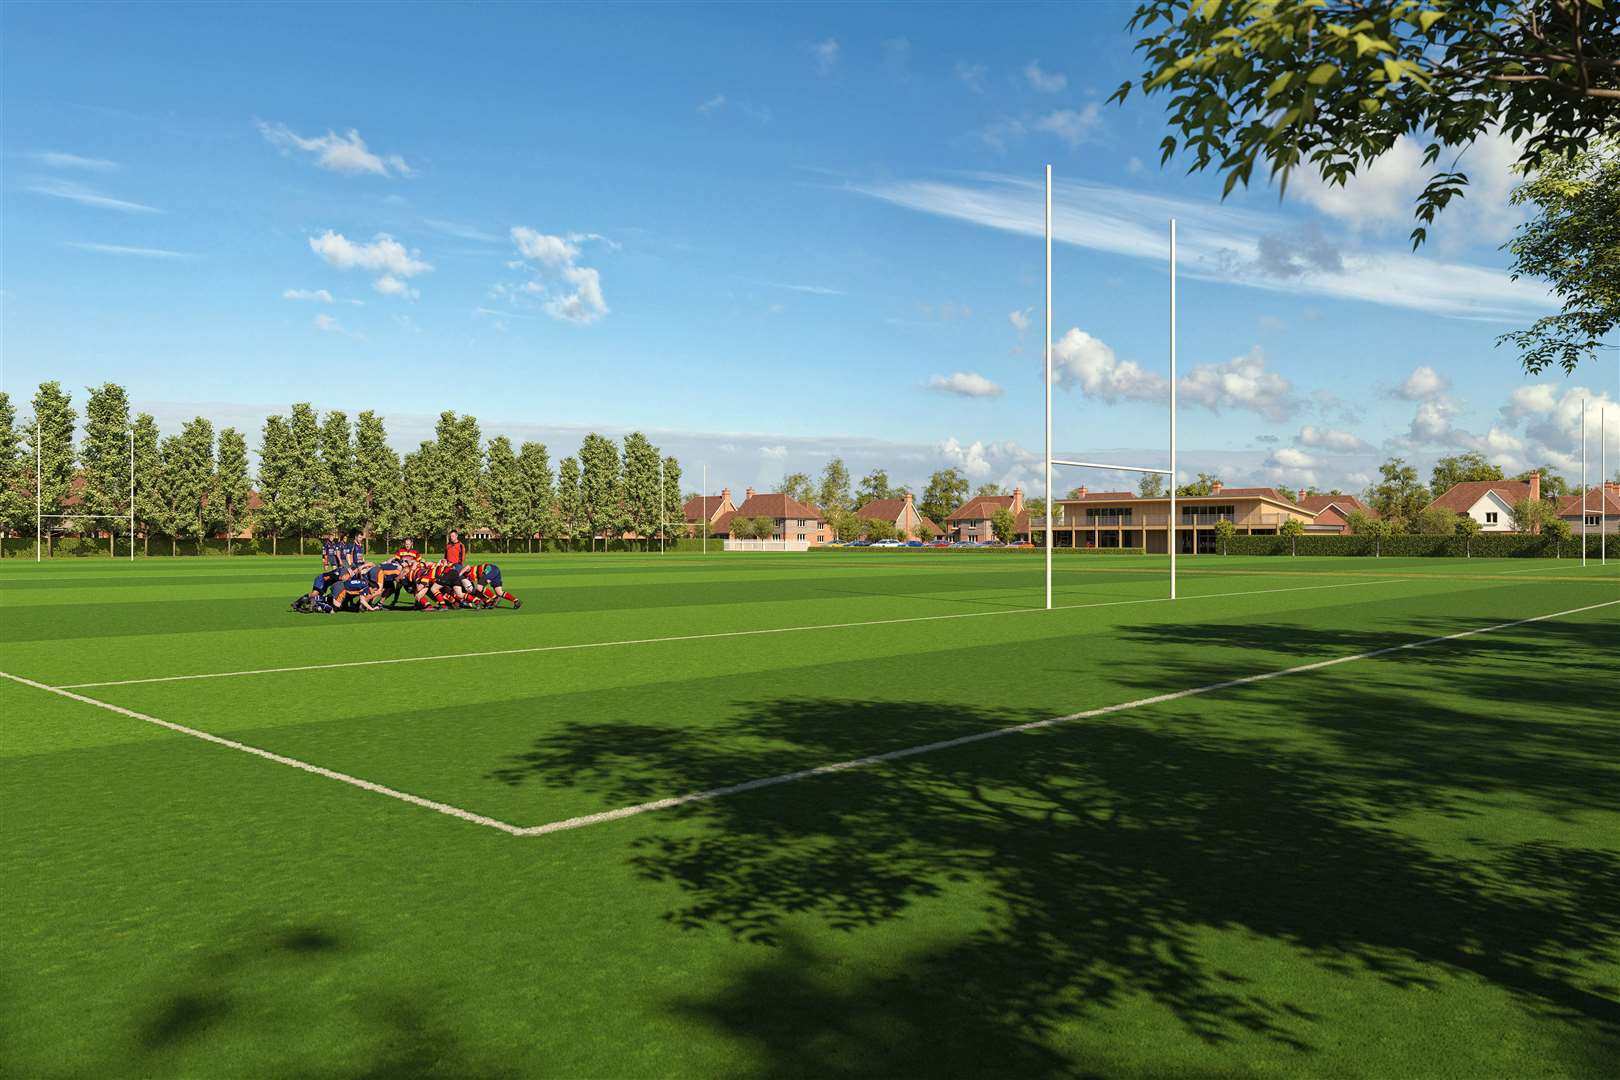 Canterbury Rugby Club also wants to develop new facilities at Highland Court.